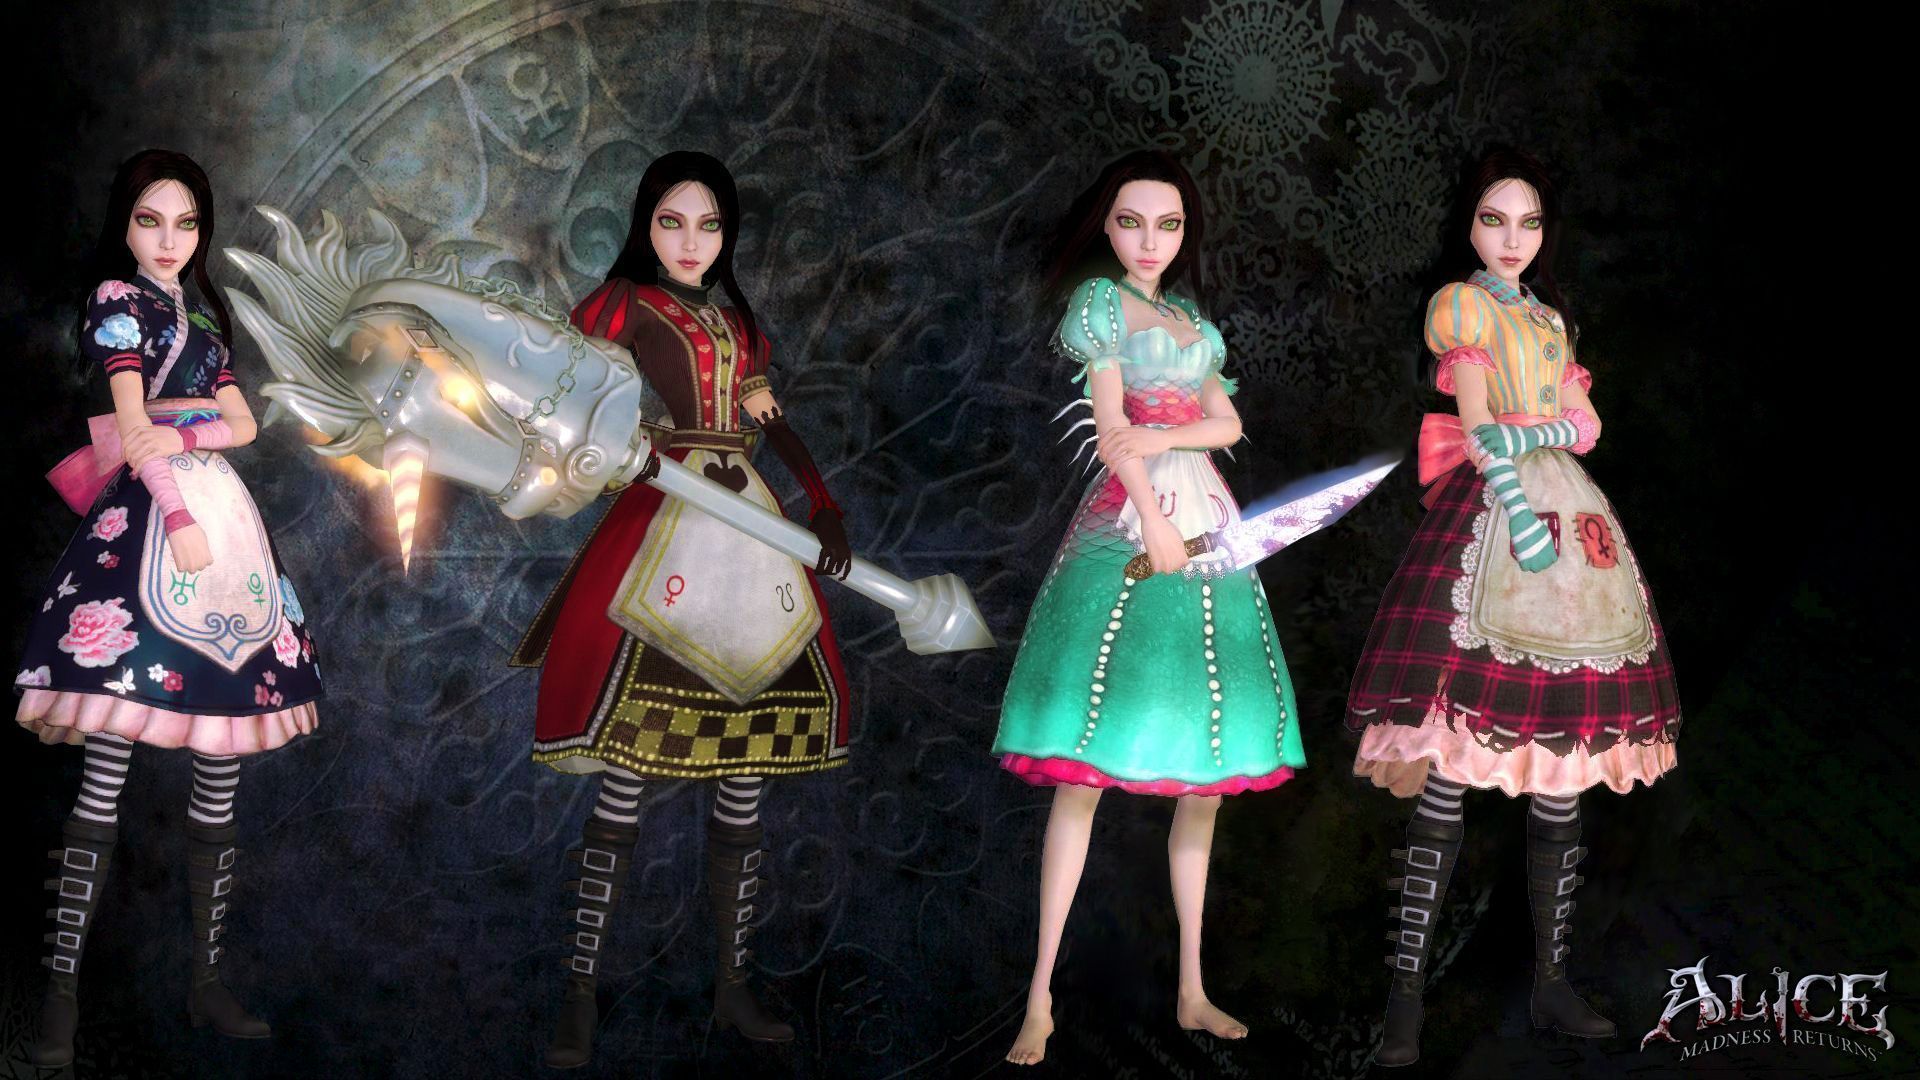 209 Alice Madness Returns HD Wallpapers Backgrounds - Wallpaper